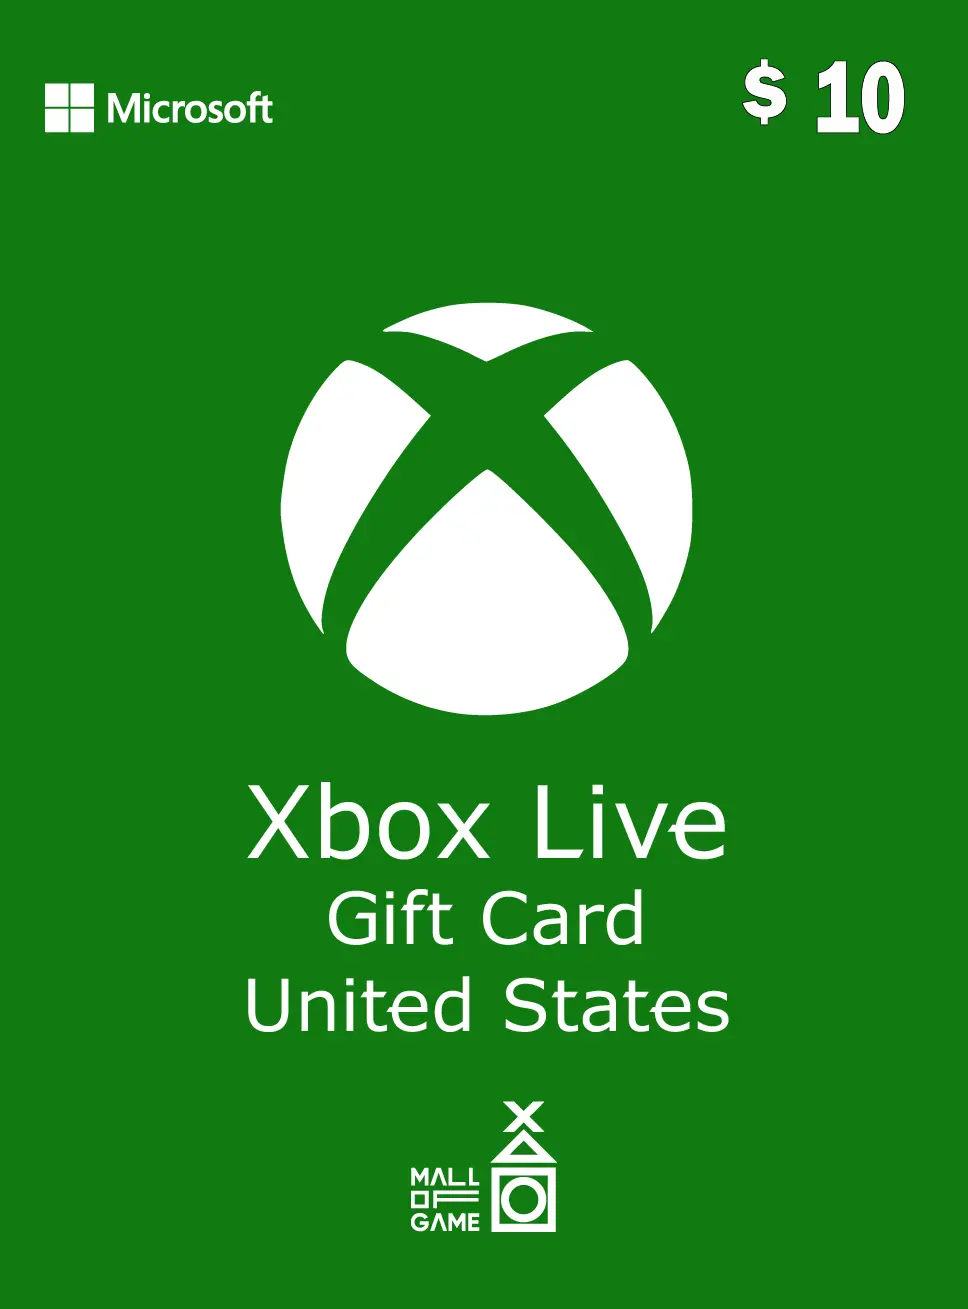 Xbox Live Gift Card - US$ 10